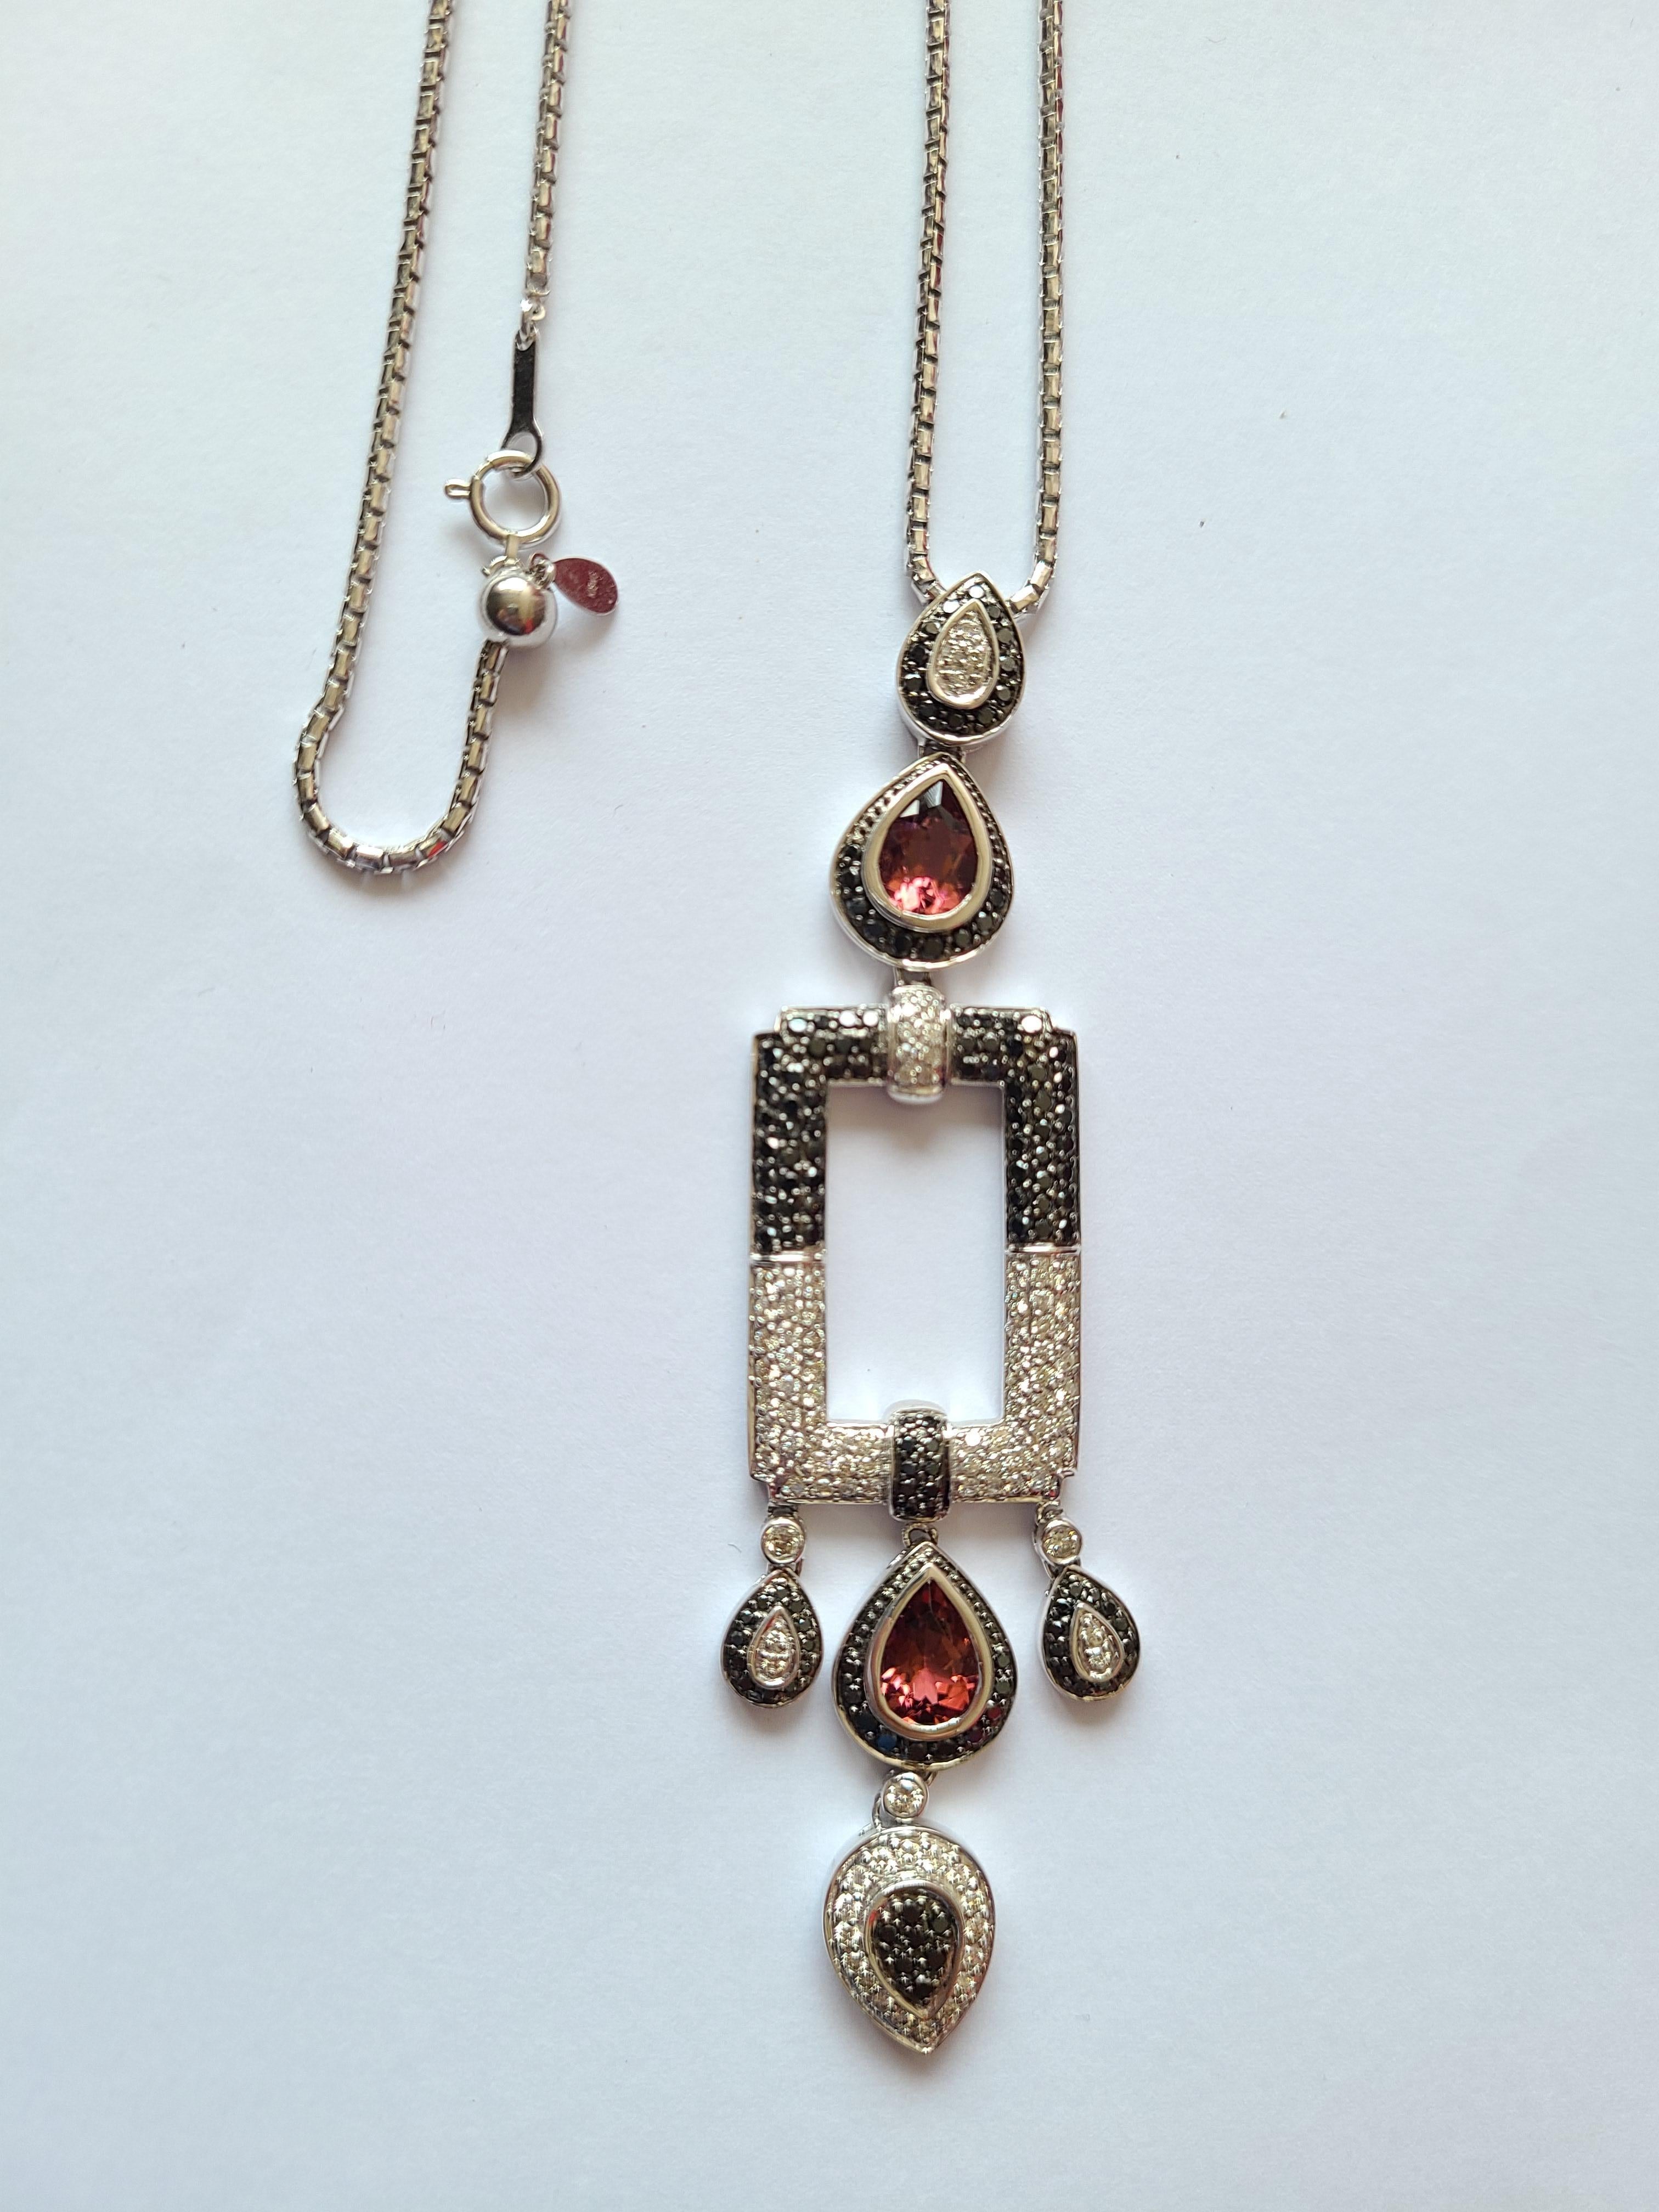 A beautiful and stylish art deco style pendant in 18k gold with rubellite and a mix of black and white diamond. The diamond weight is 2.43 carats and rubellite weight is 2.50 carats. The Pendant length in cm at its maximum is 39 cm and is adjustable